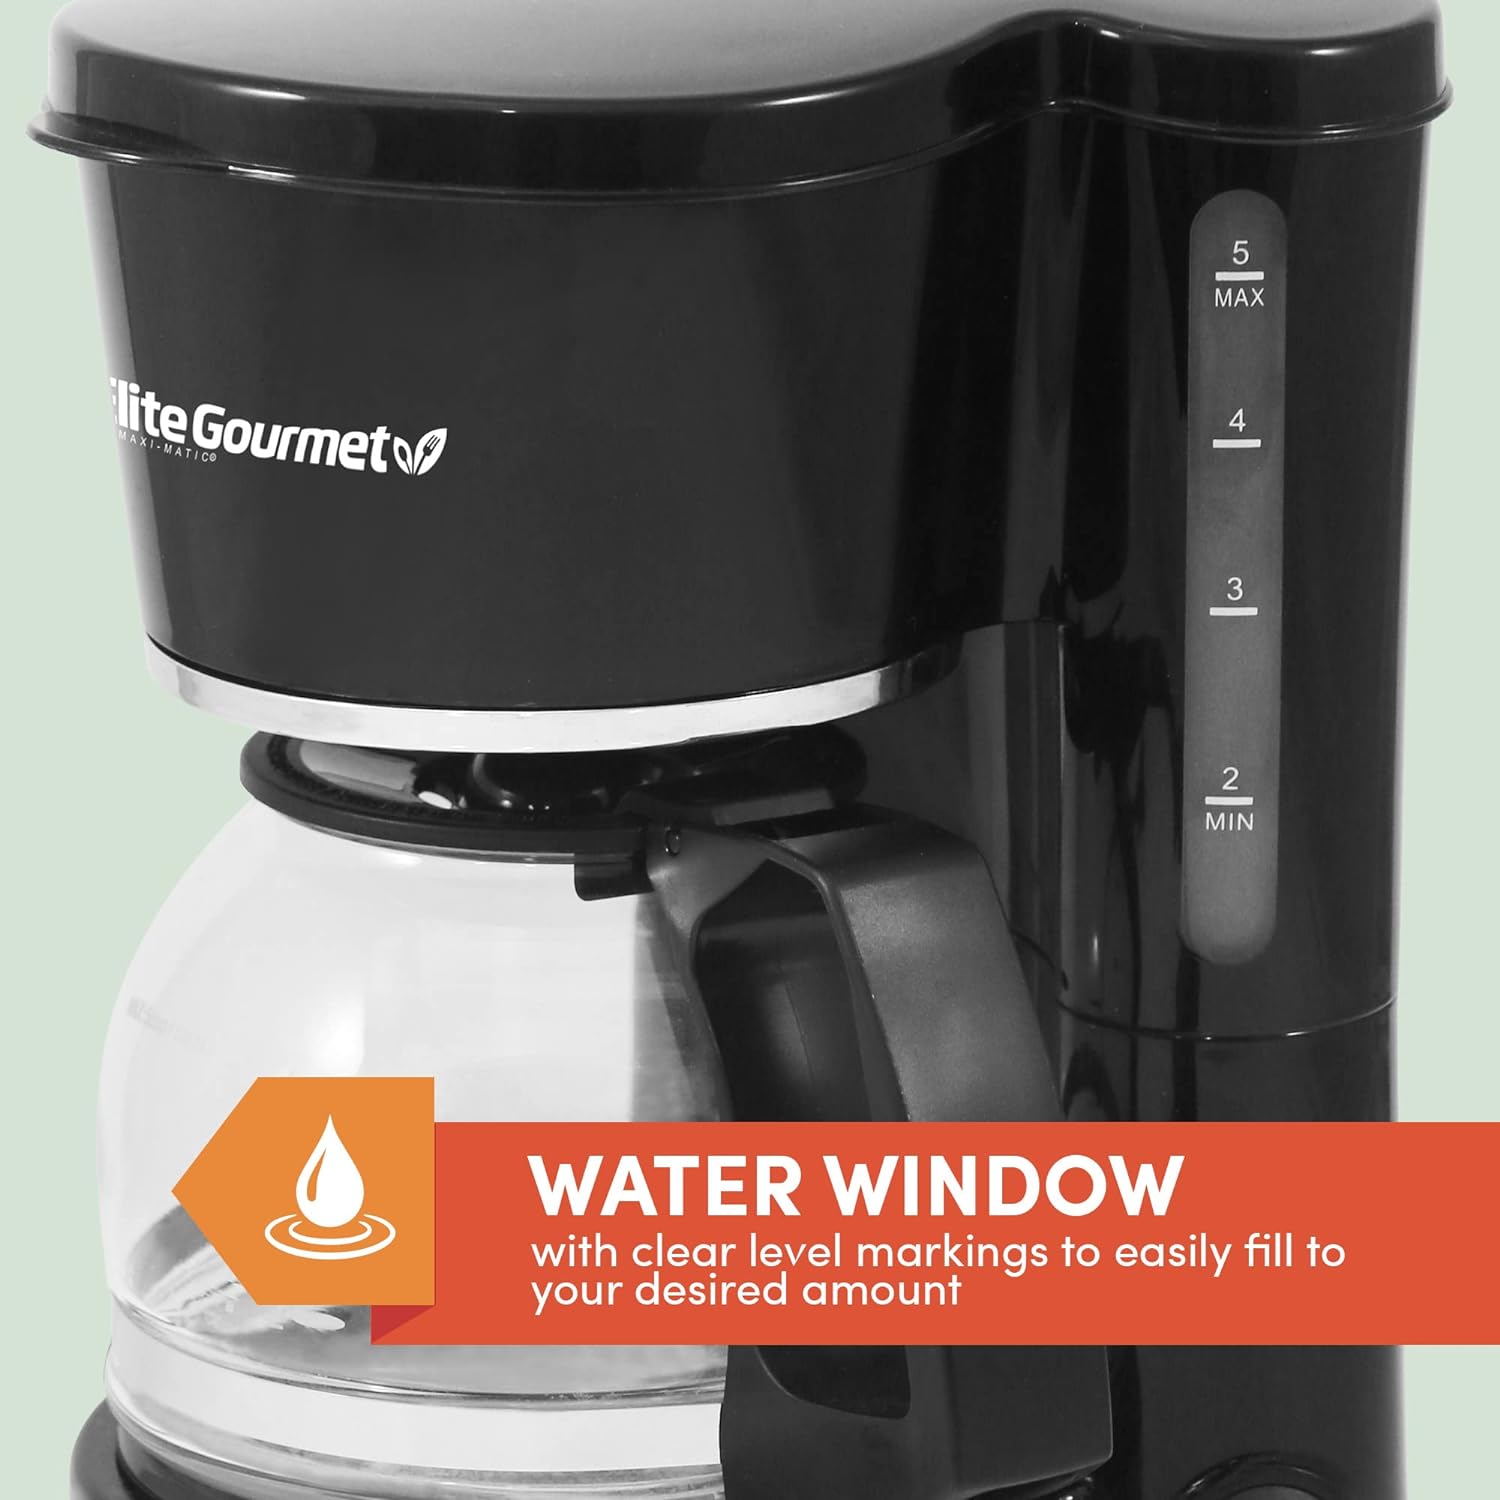 Elite Gourmet EHC-5055# Automatic Brew  Drip Coffee Maker with Pause N Serve Reusable Filter, On/Off Switch, Water Level Indicator, Black